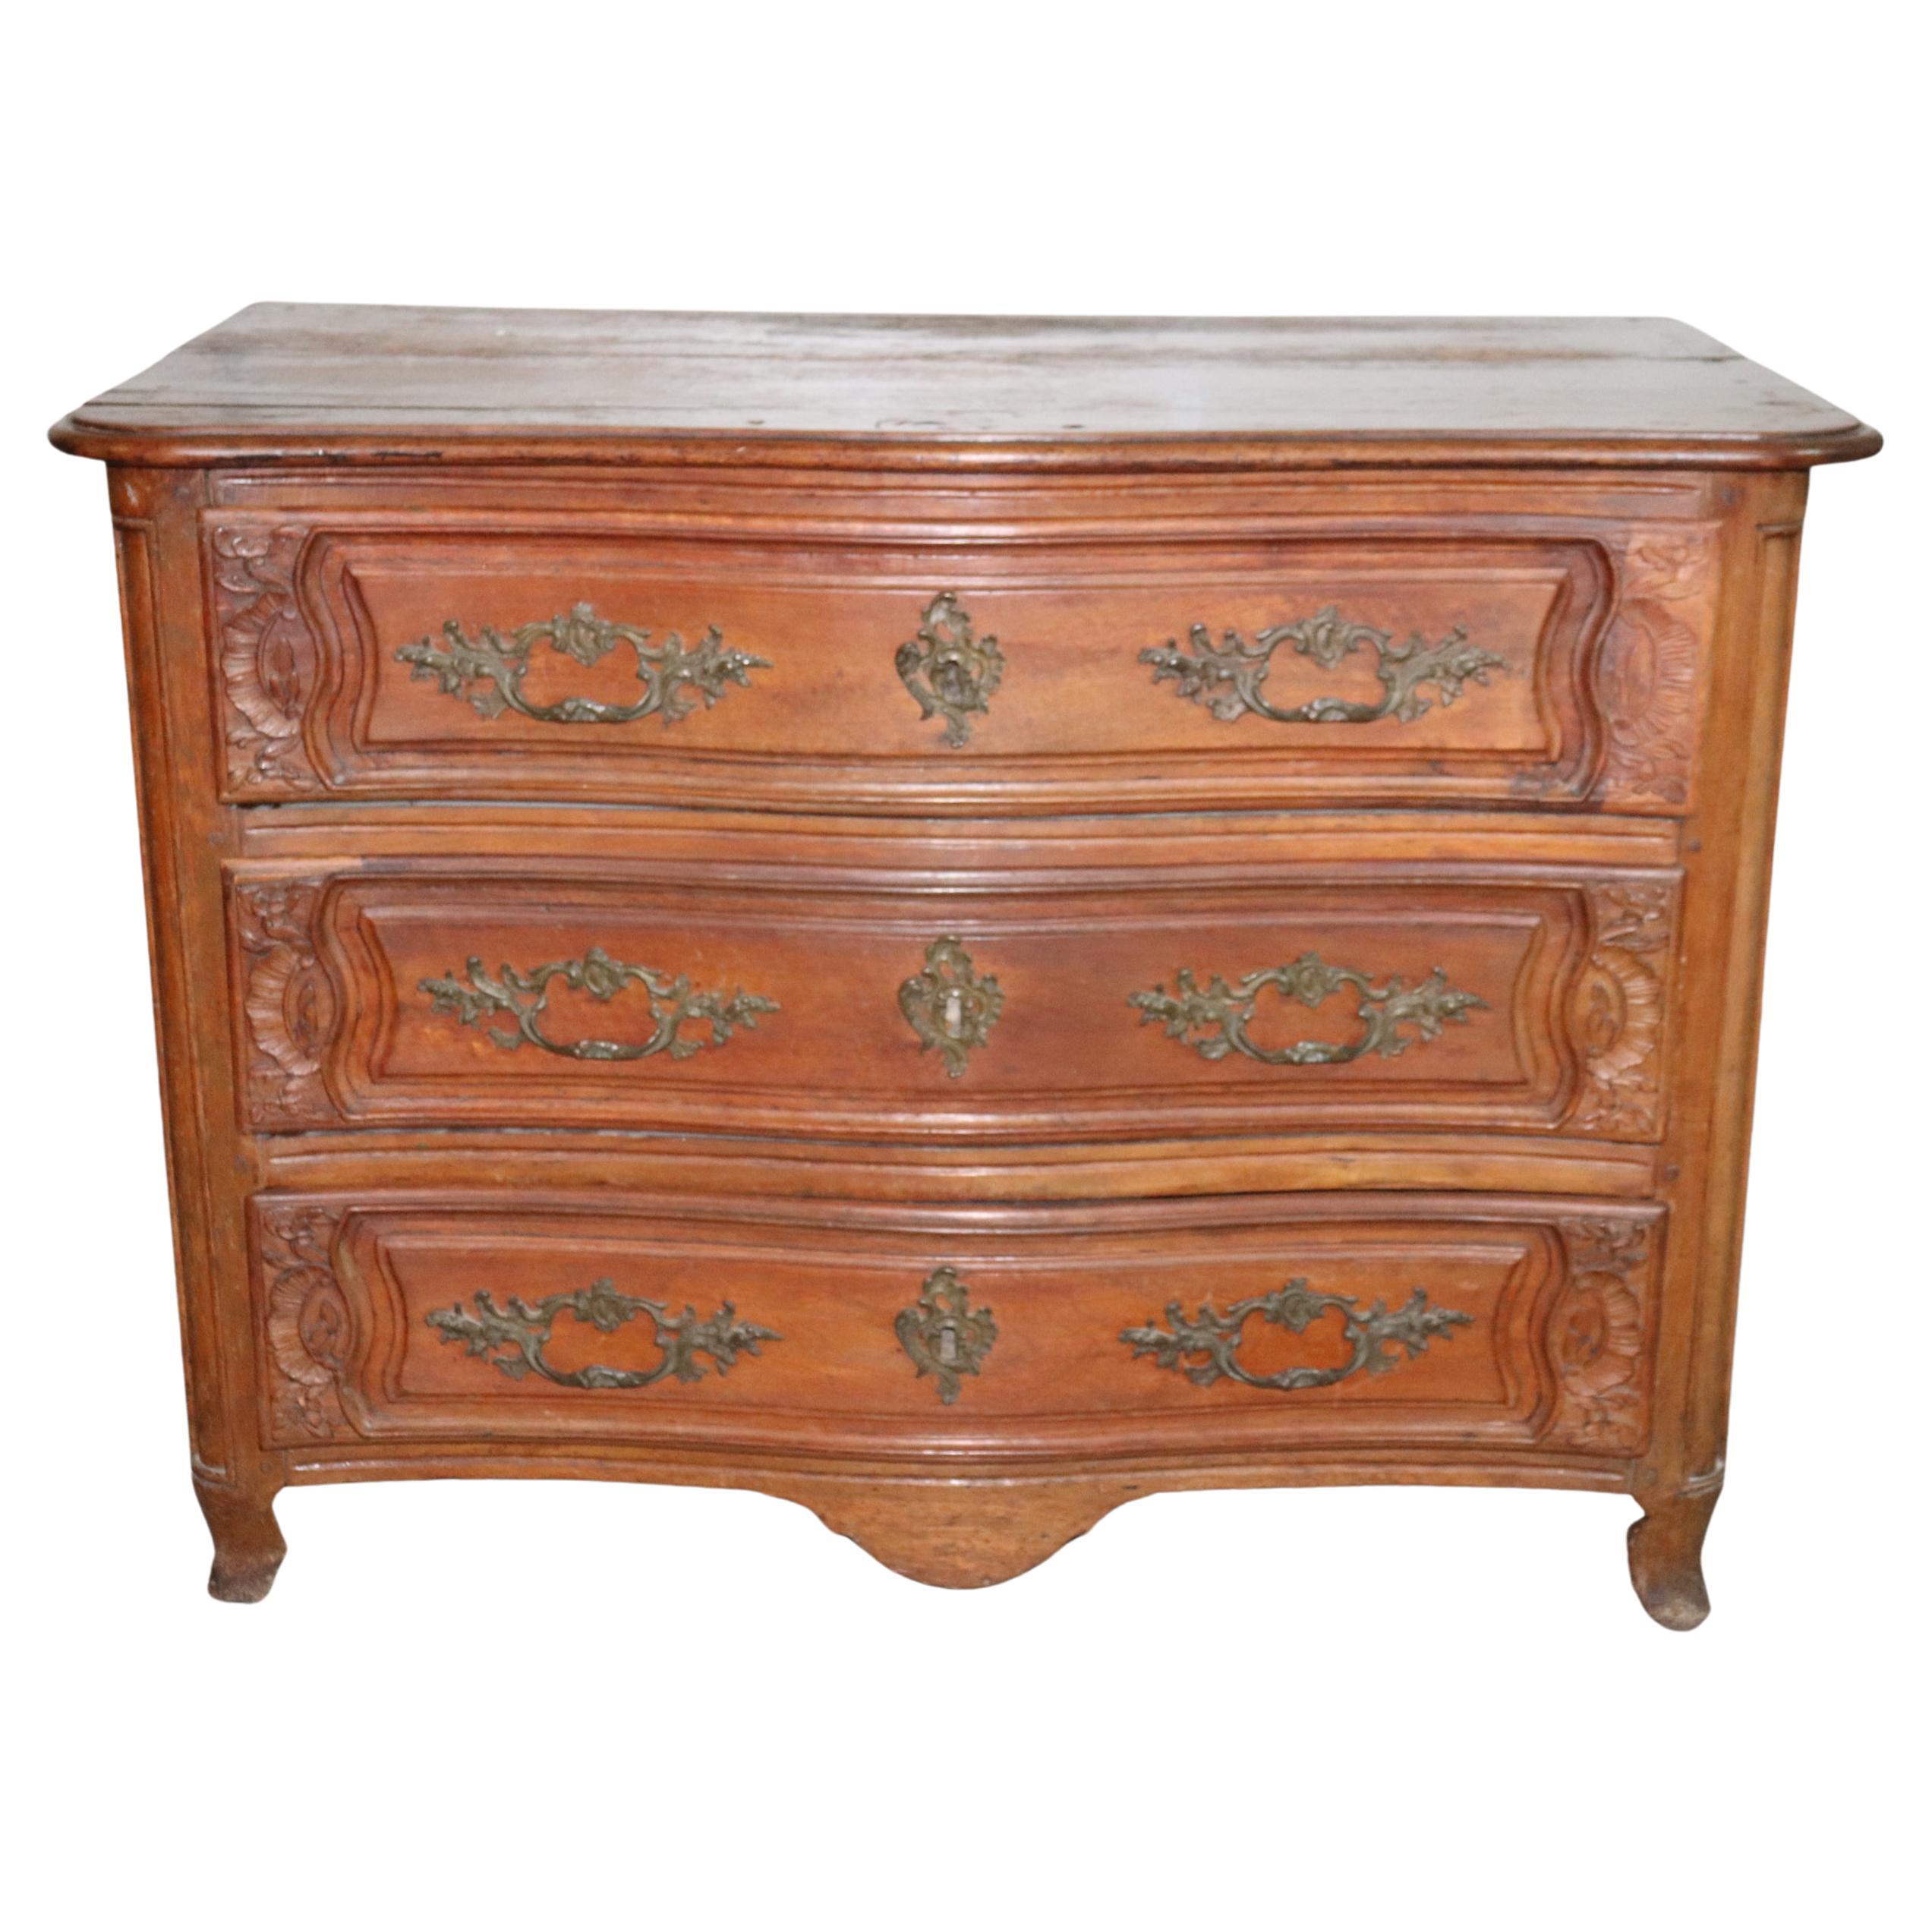 Late 18th Century French Country Walnut Commode with Bronze Hardware